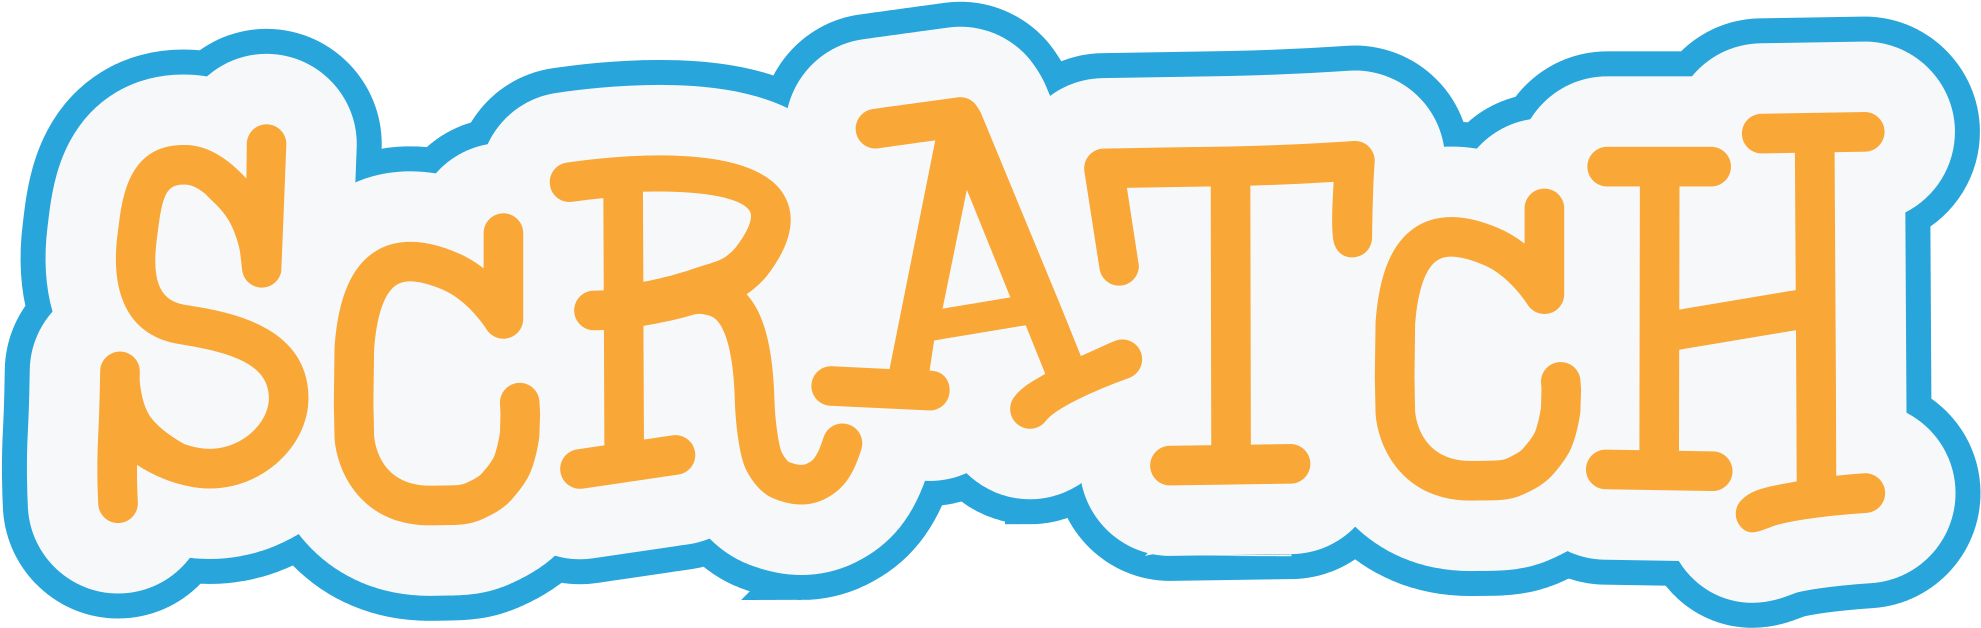 Programming And Coding - Scratch Logo (2000x640)